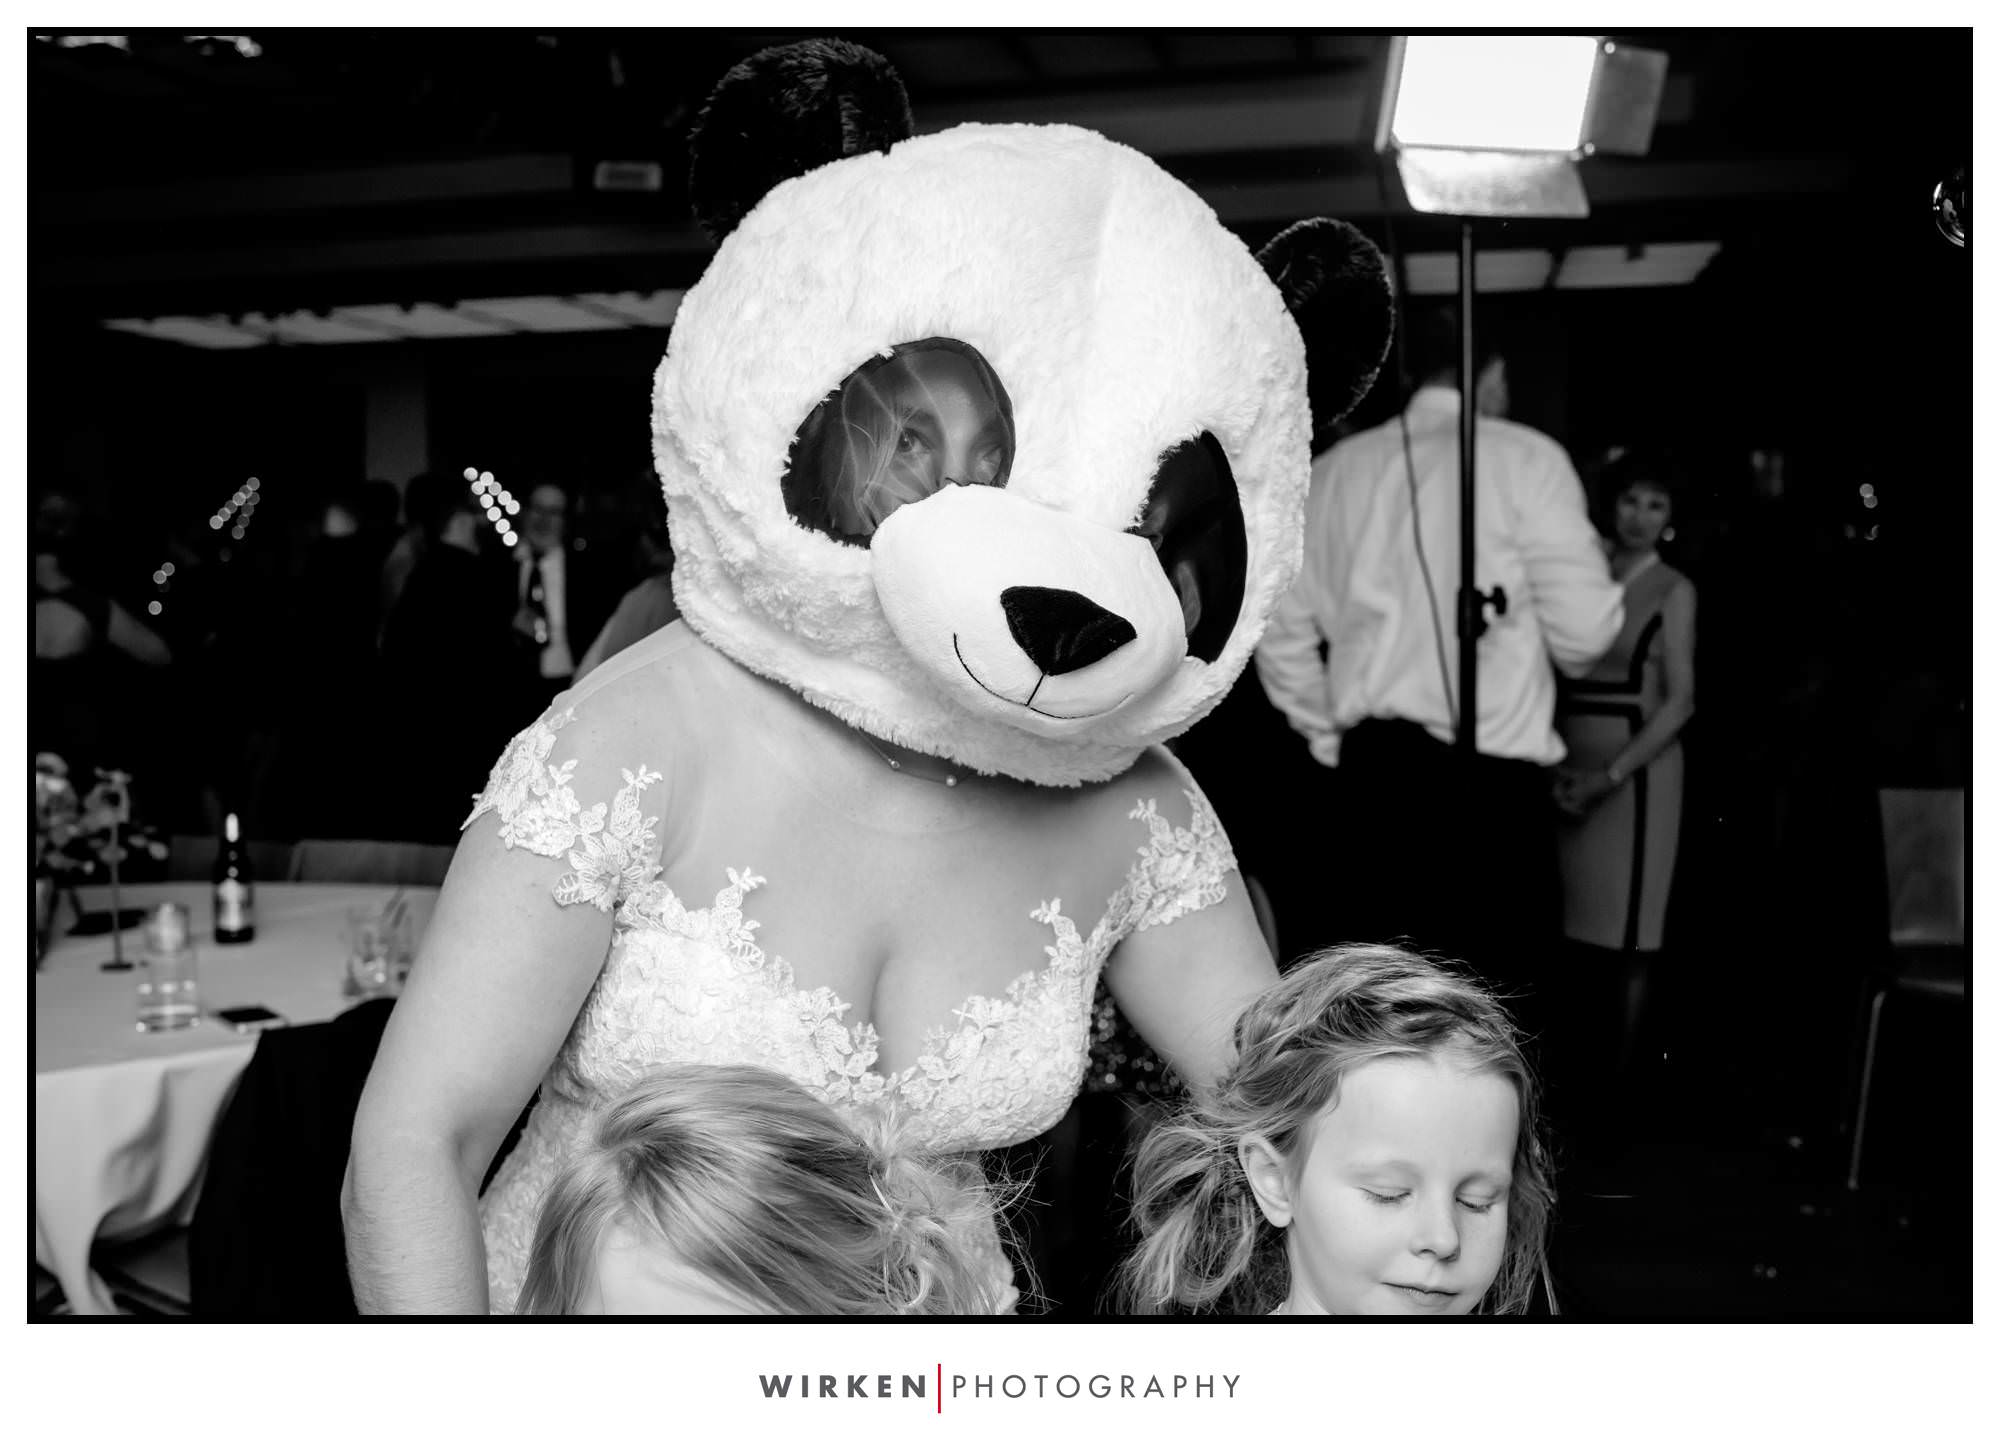 Leah wears a Panda mask at her Gallery event Center wedding reception